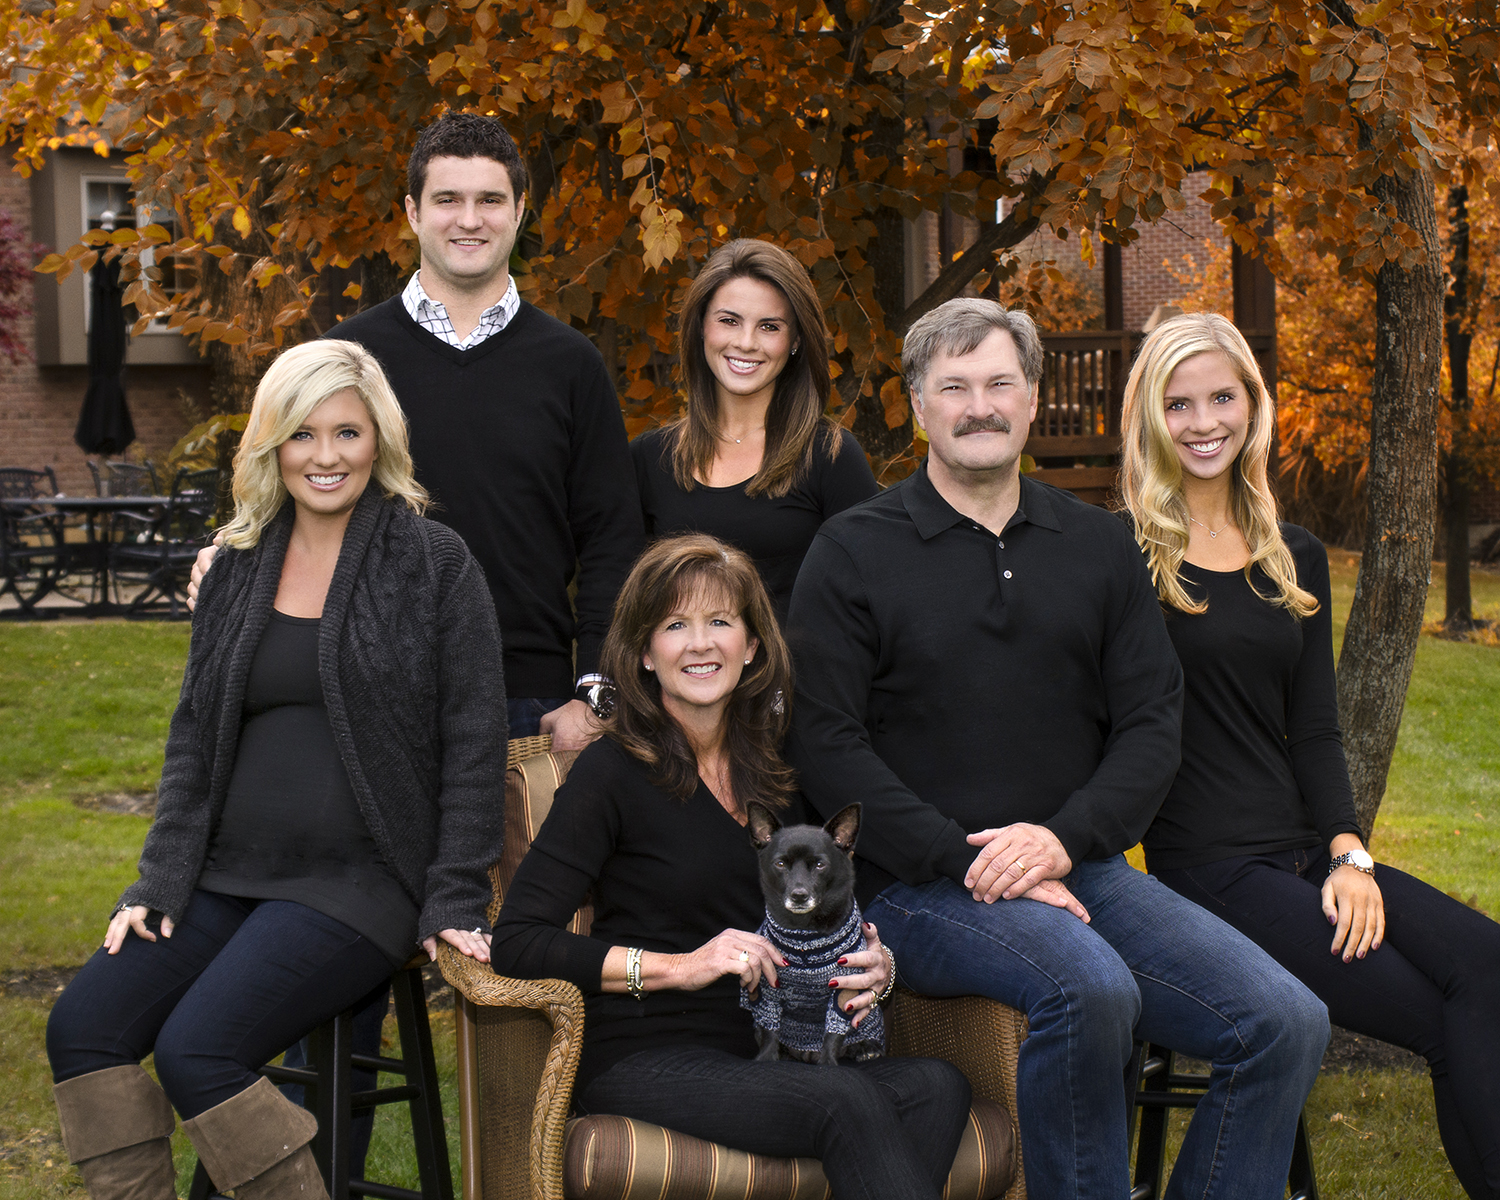 fall family home portrait in Centervill Ohio by Dan Cleary of Cleary Creative Photography